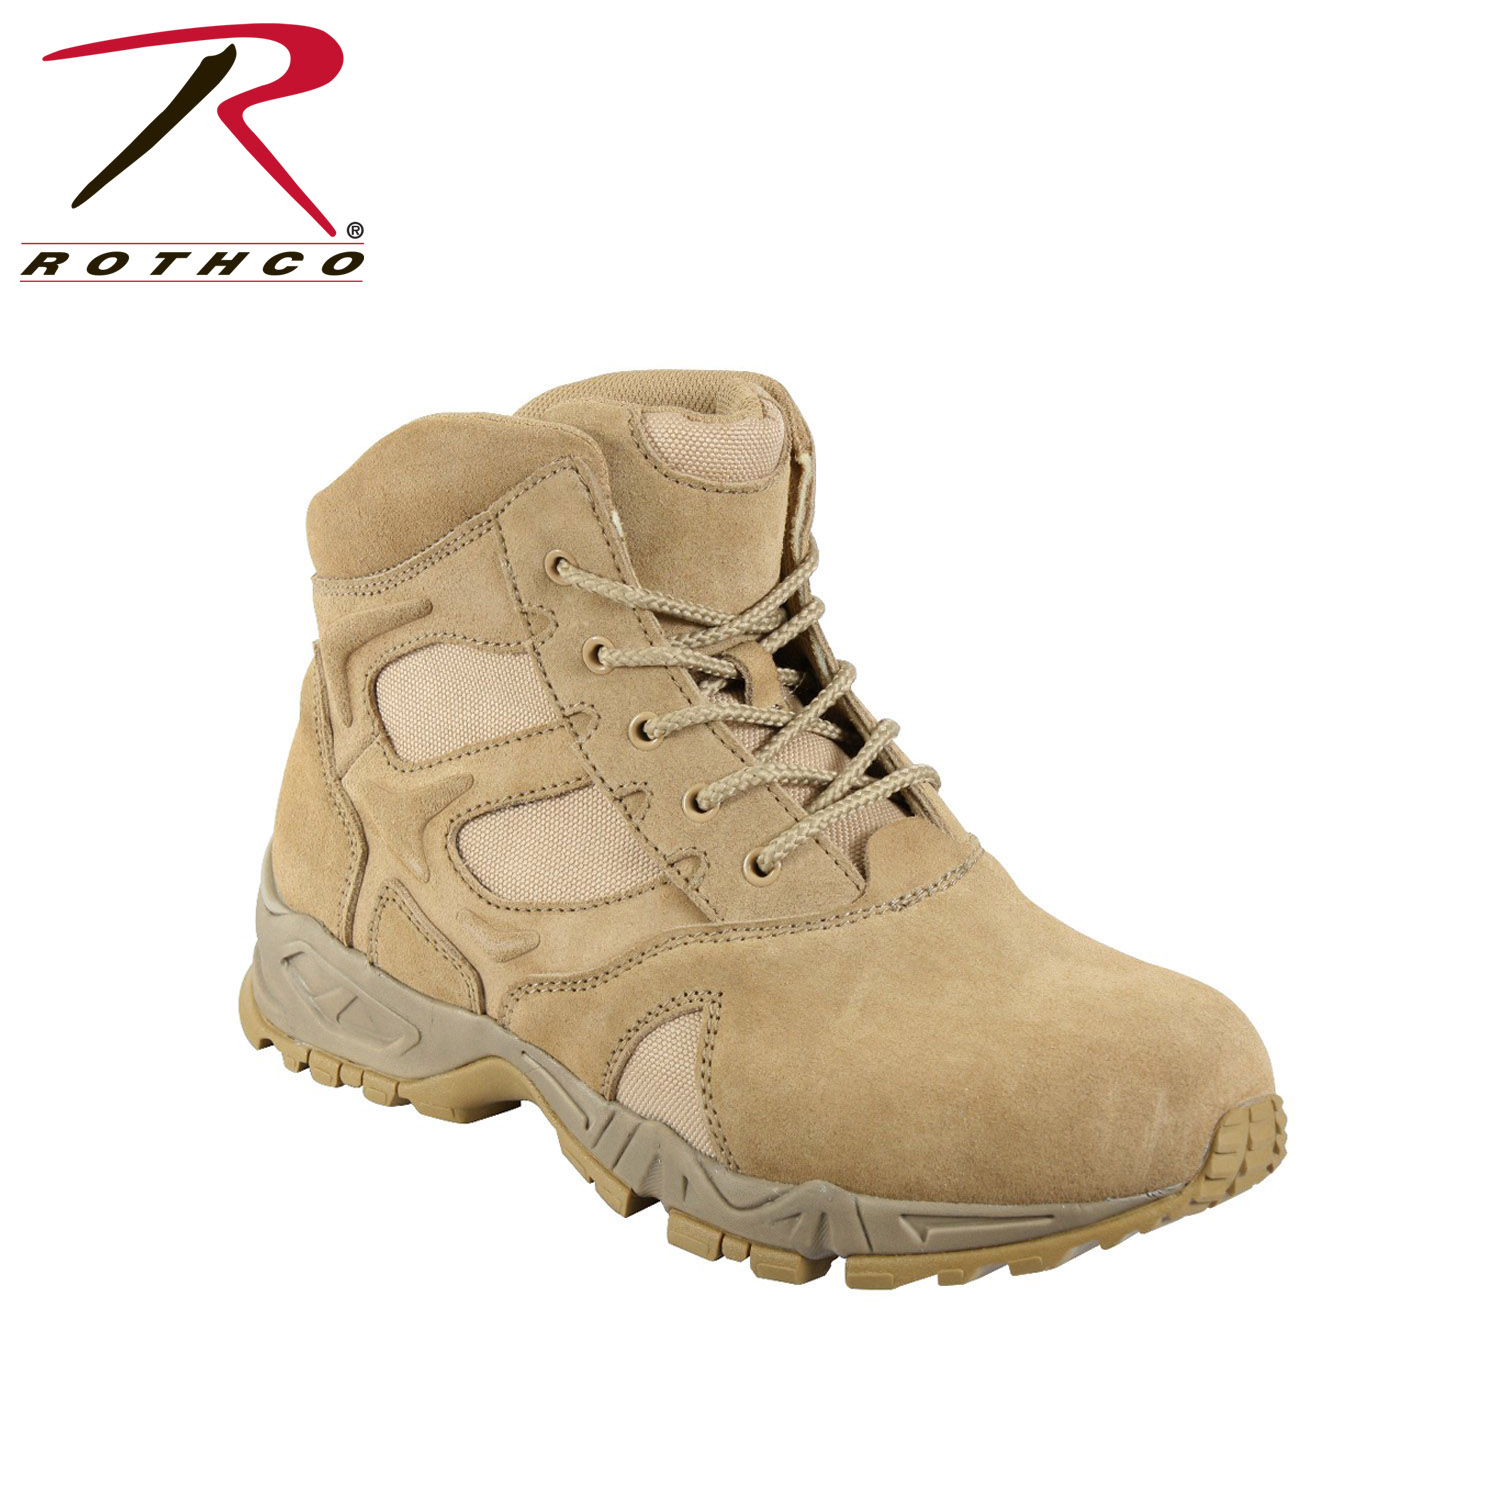 Mens Black Military Style Forced Entry Waterproof Tactical Boots by Rothco 